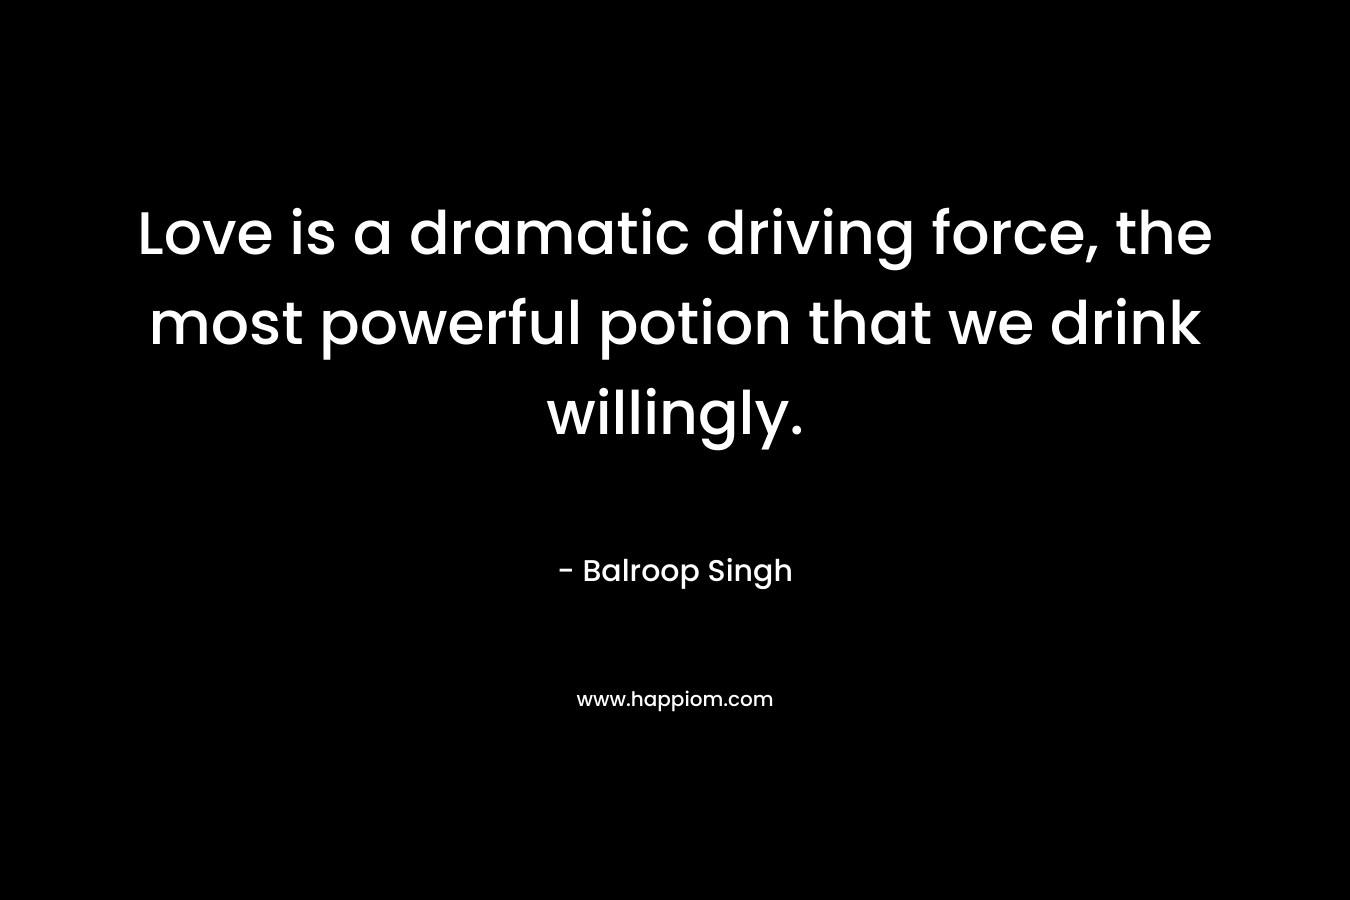 Love is a dramatic driving force, the most powerful potion that we drink willingly. – Balroop Singh